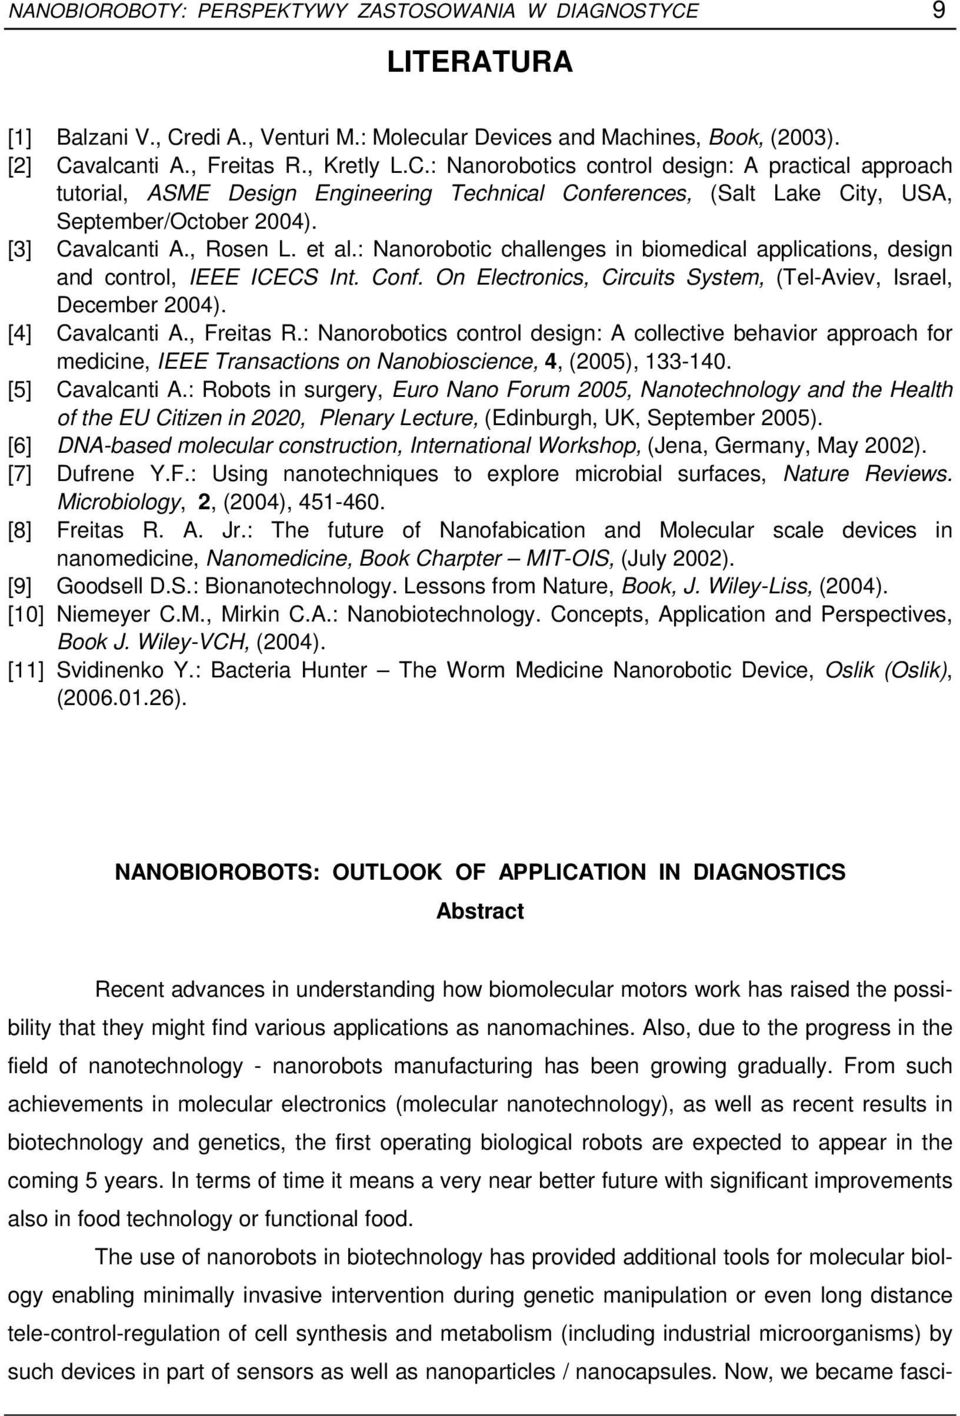 [3] Cavalcanti A., Rosen L. et al.: Nanorobotic challenges in biomedical applications, design and control, IEEE ICECS Int. Conf. On Electronics, Circuits System, (Tel-Aviev, Israel, December 2004).